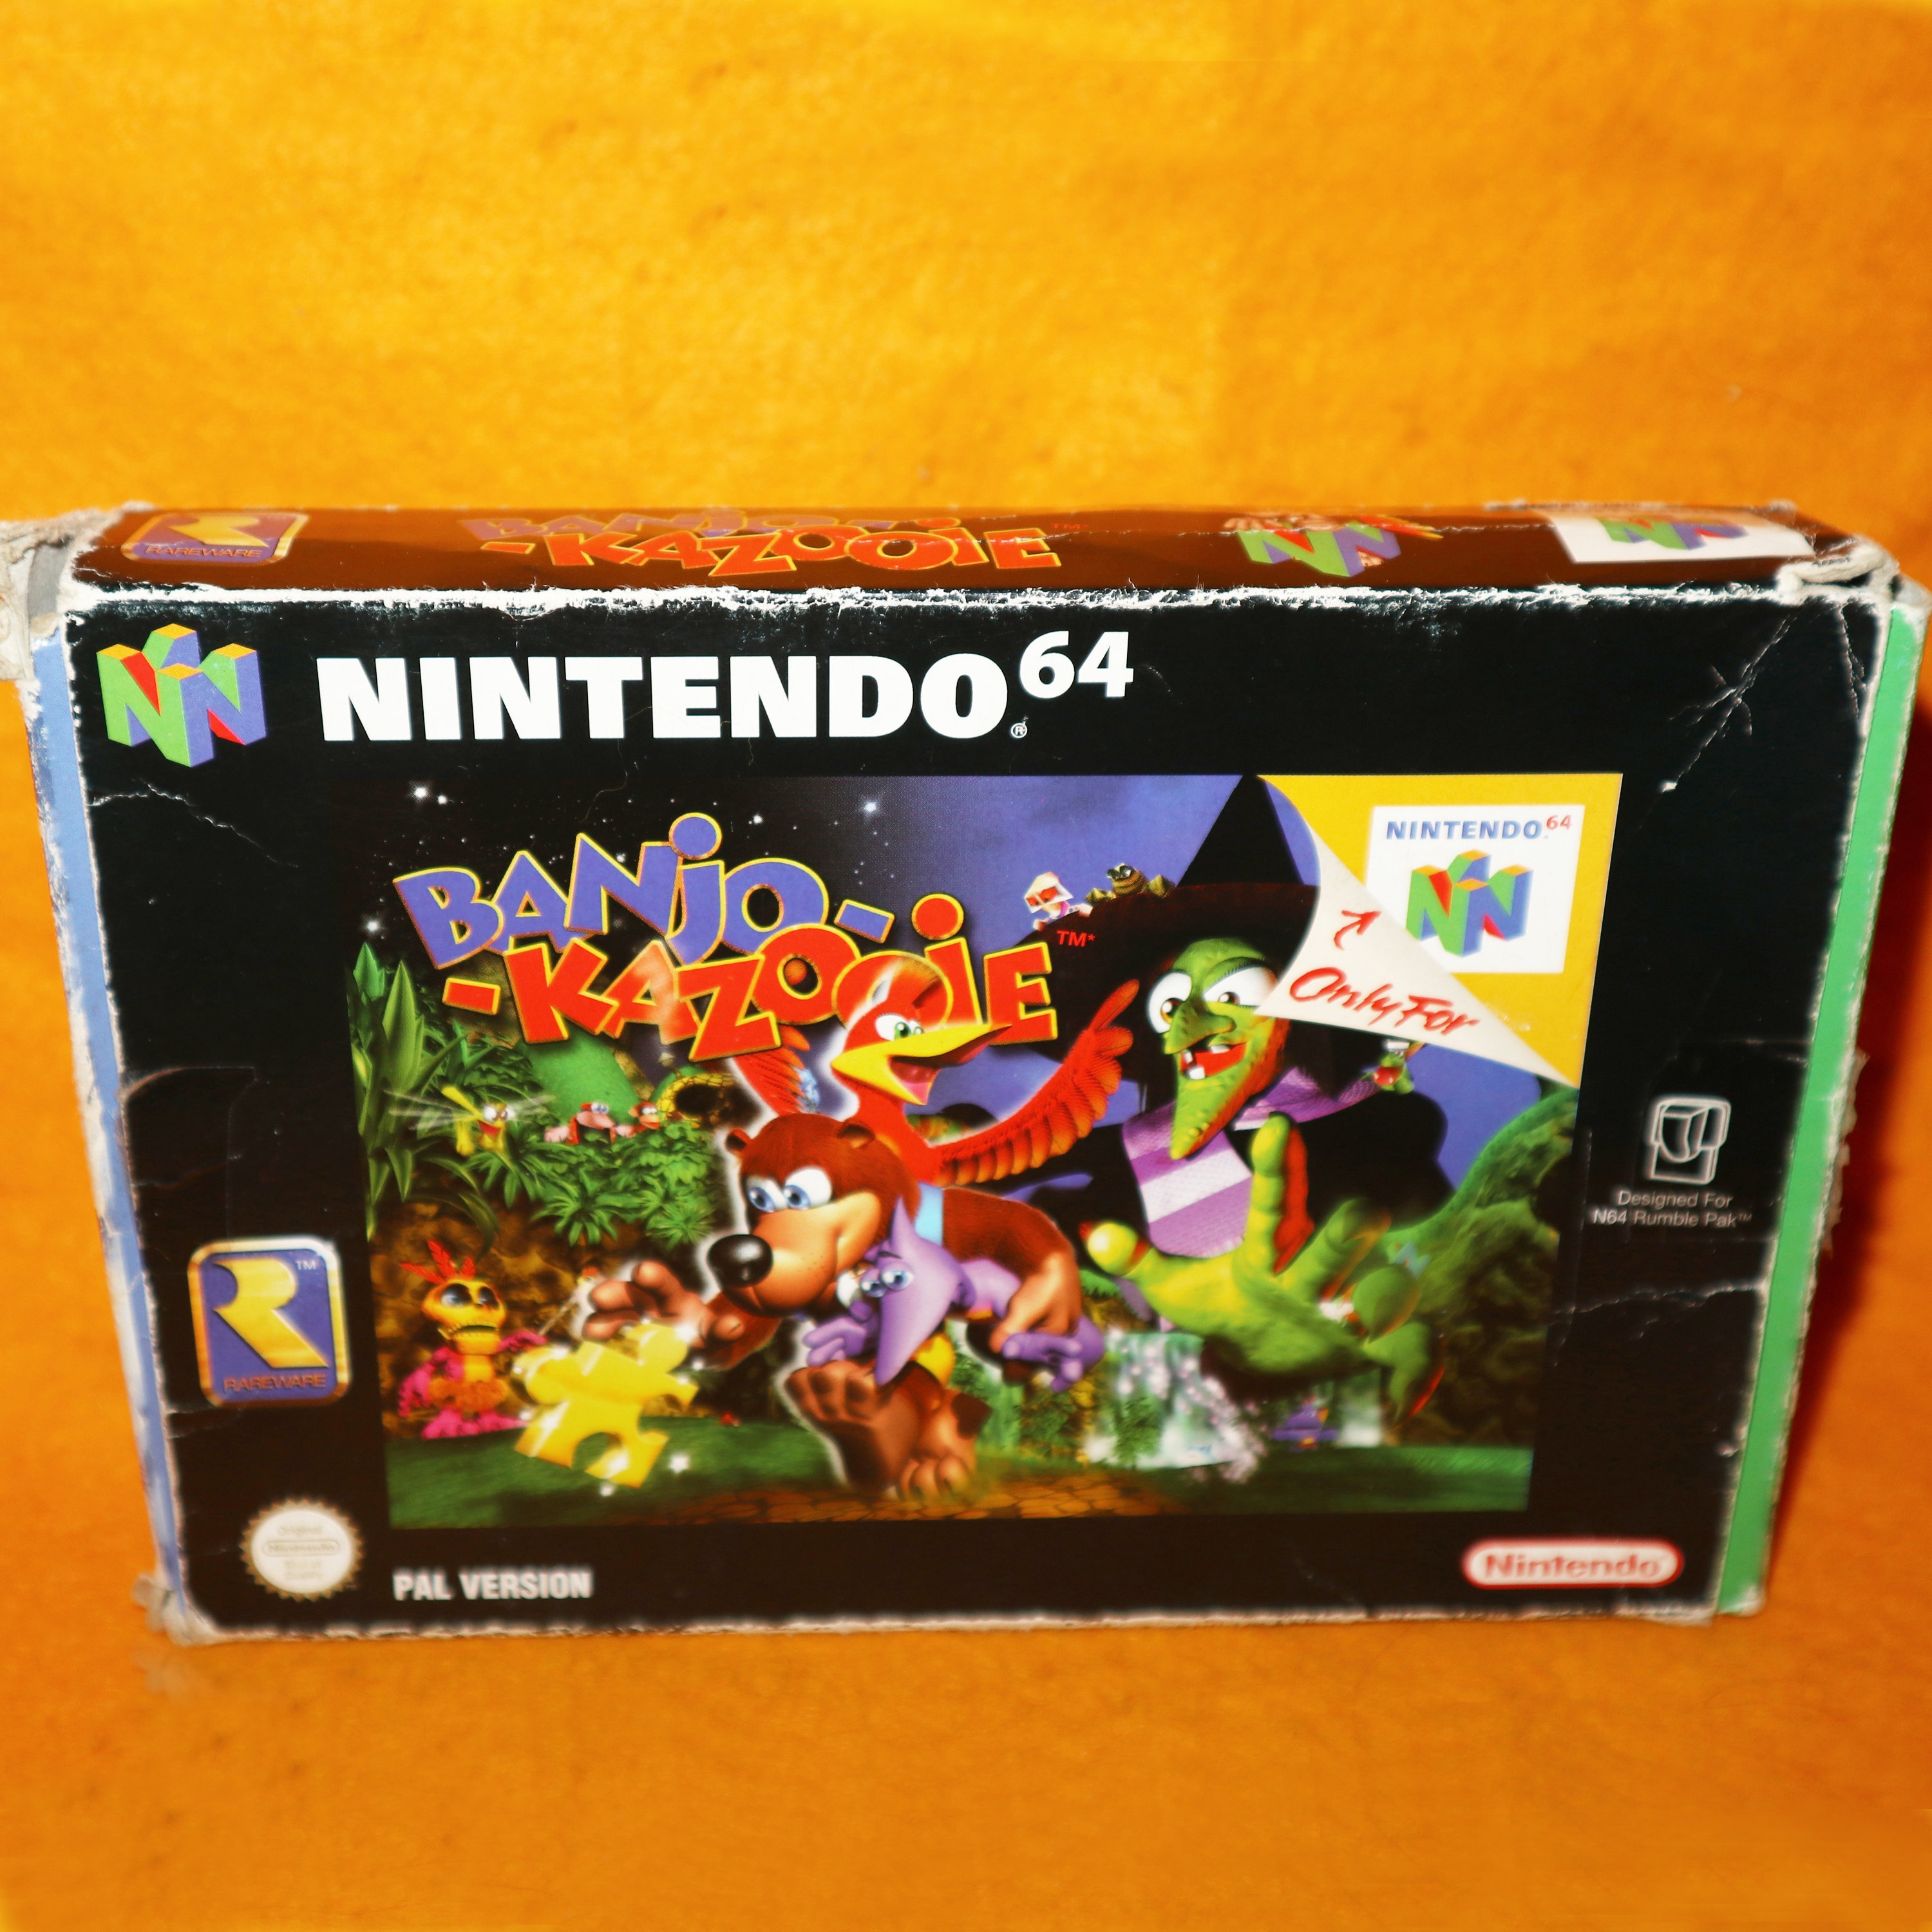 N64 Banjo-Kazooie Nintendo 64 Game Authentic Cartridge Only Tested